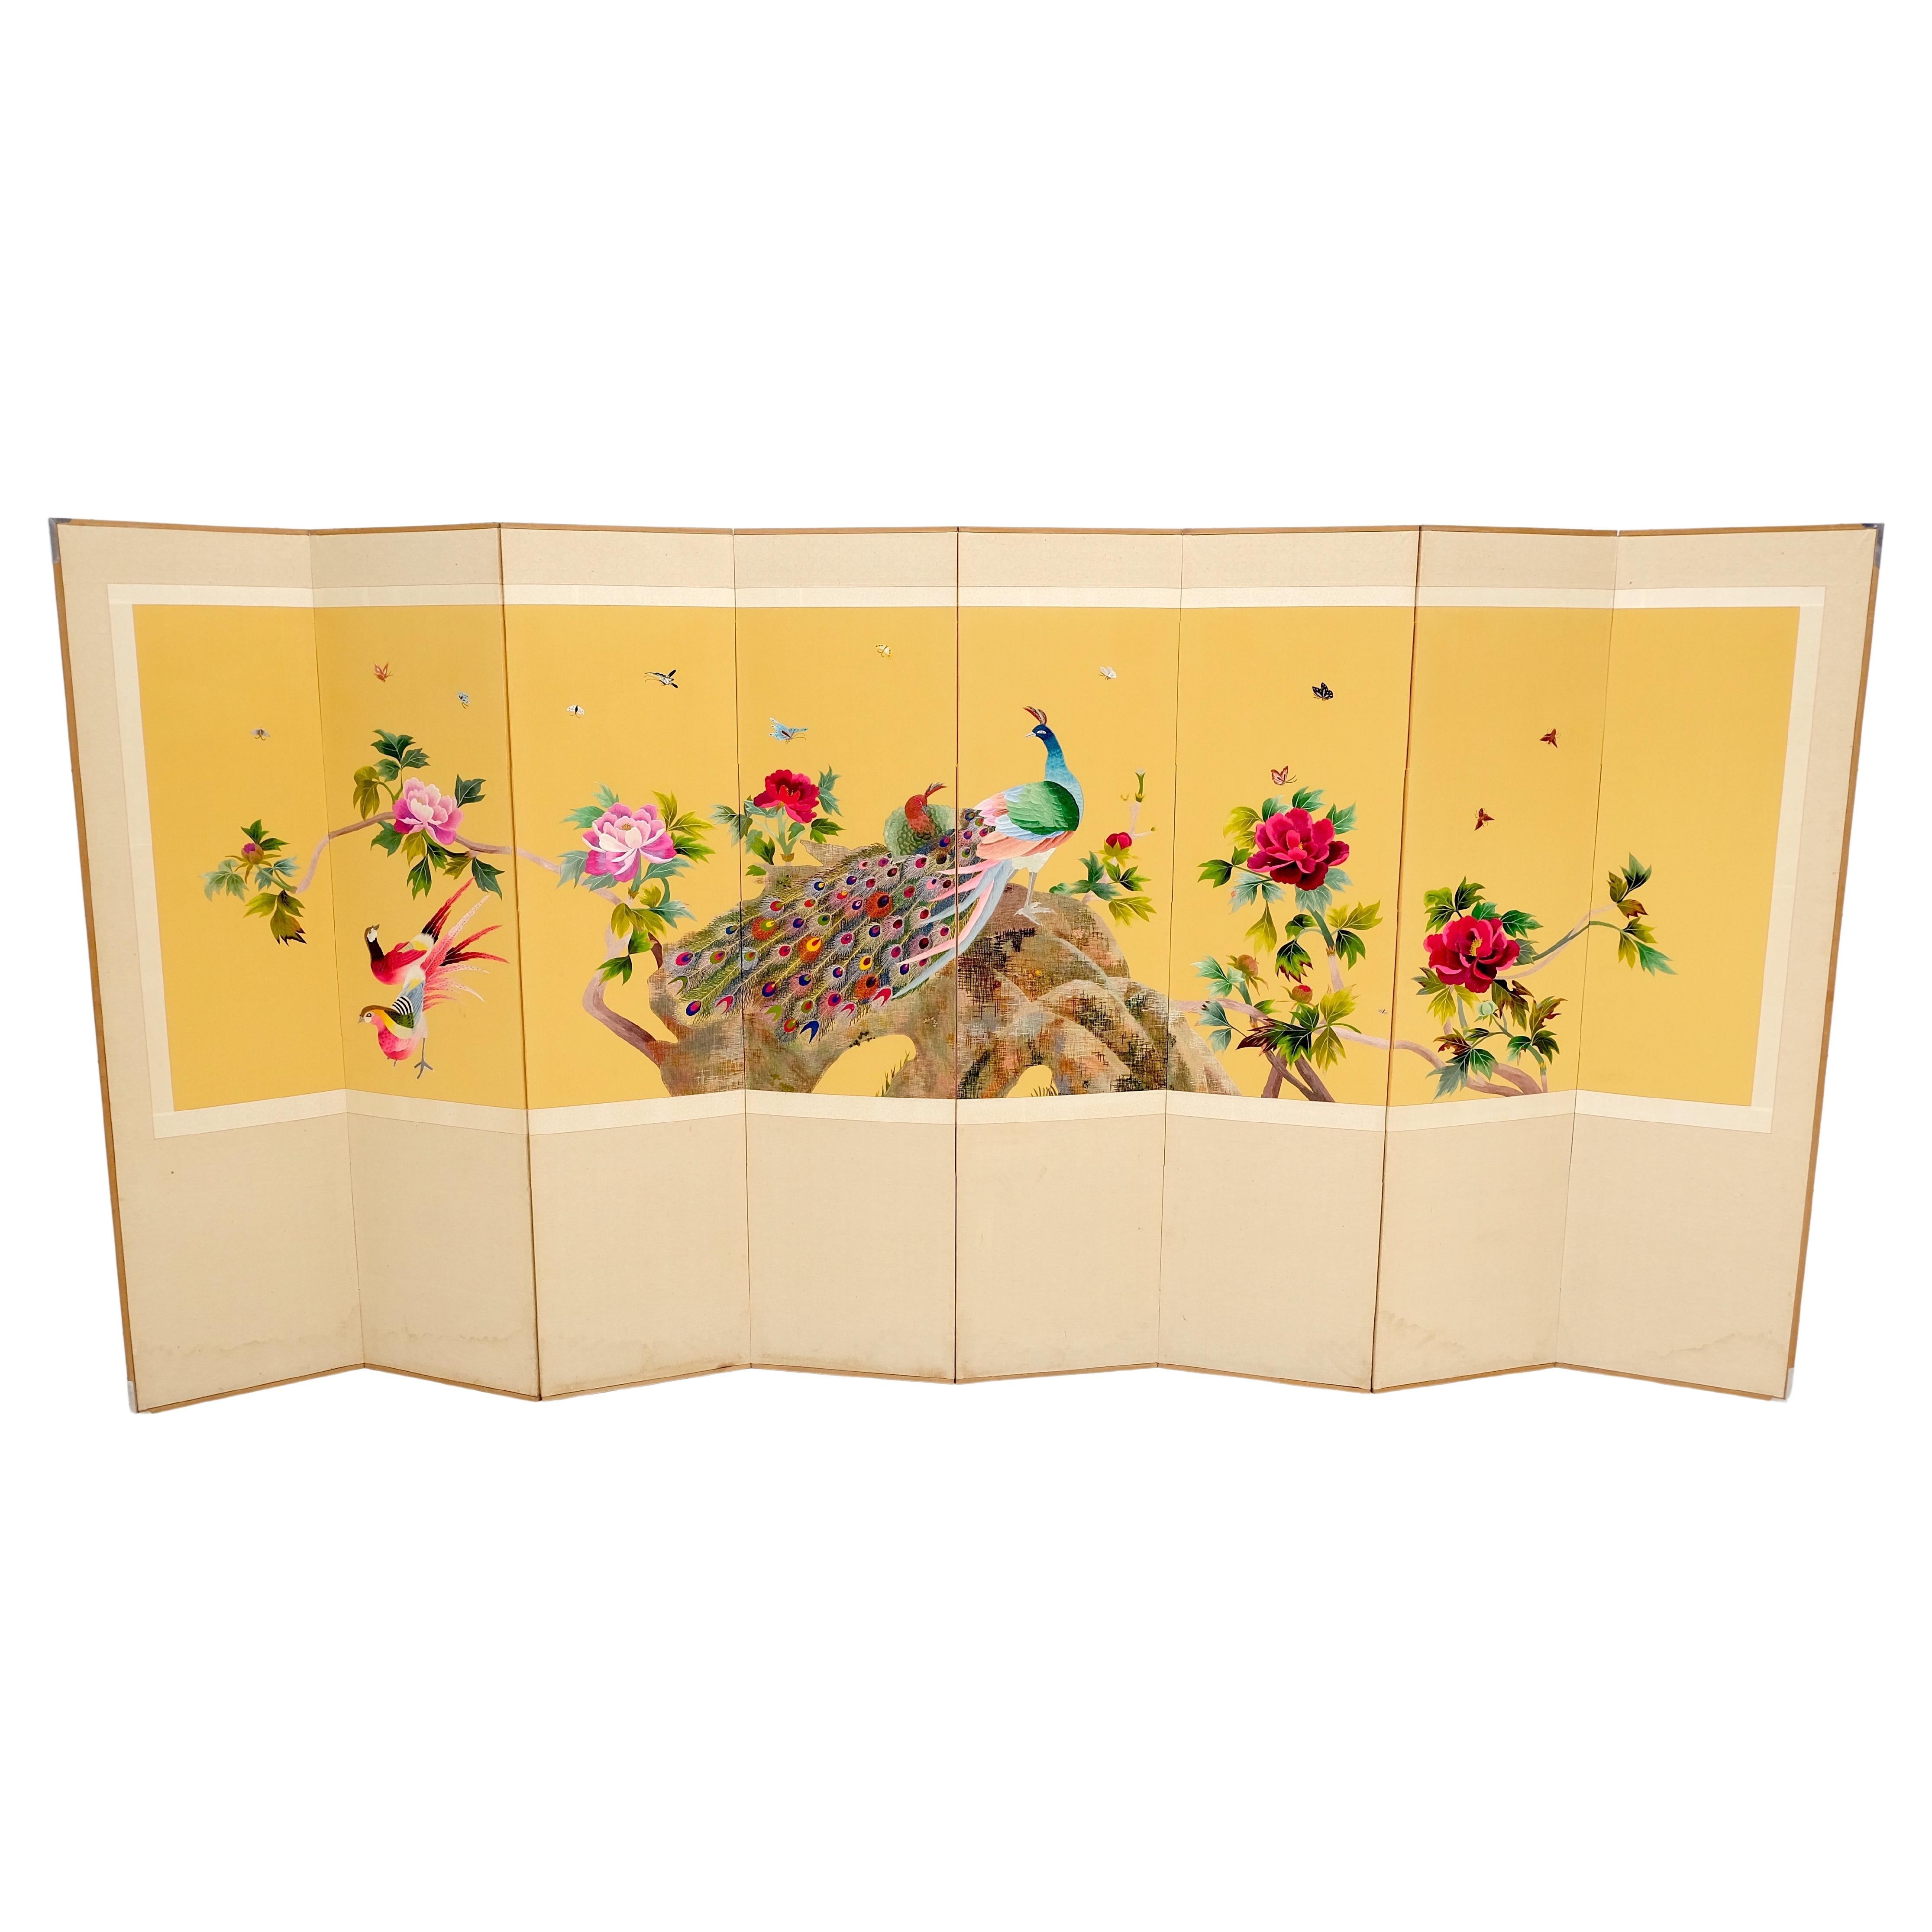 Oriental Chineese decorative 8 panel silk embroidery peacock scene room divider screen.